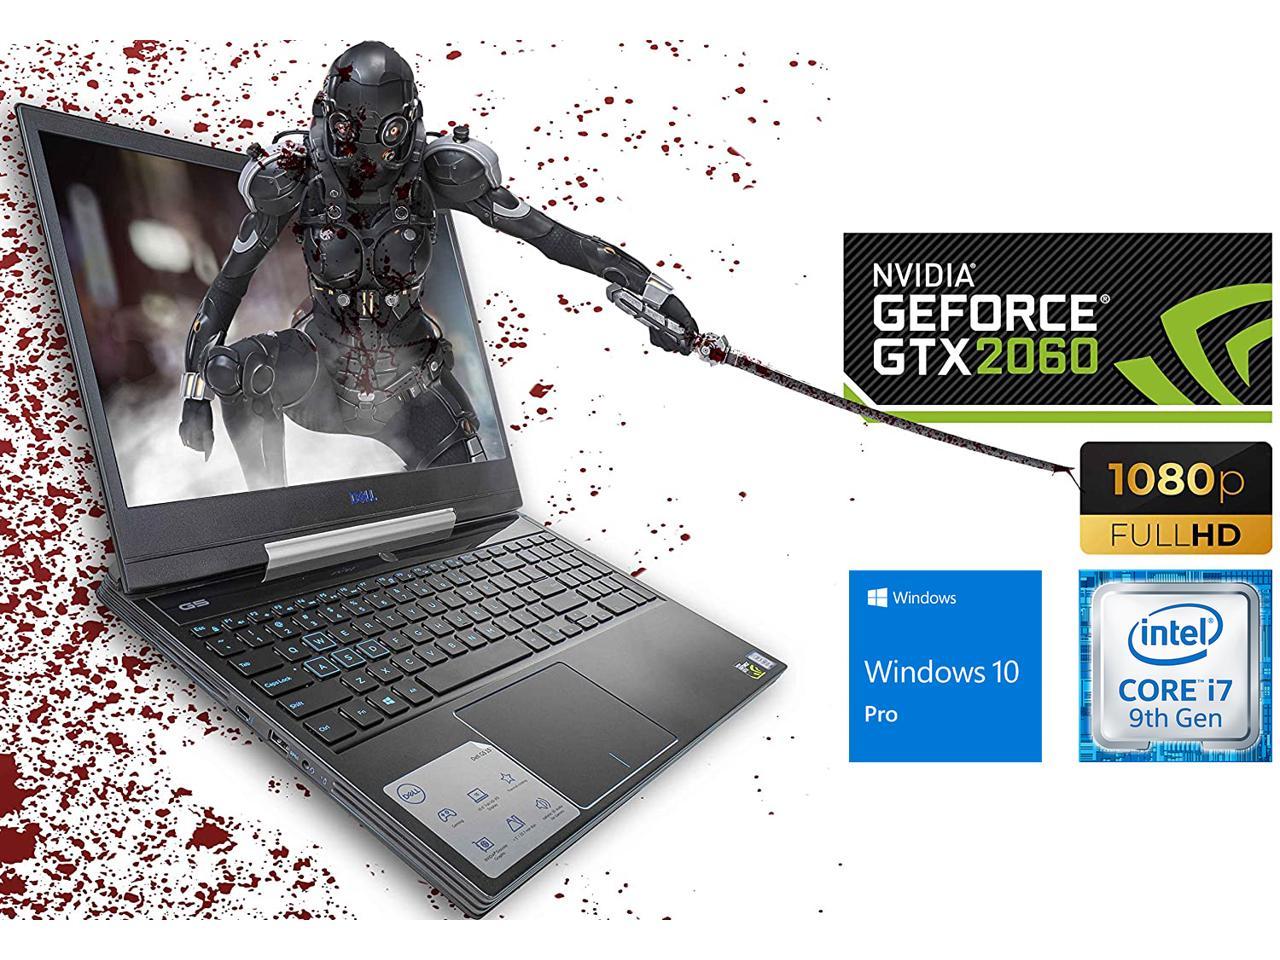 Dell G5 5590 Gaming Notebook, 15.6